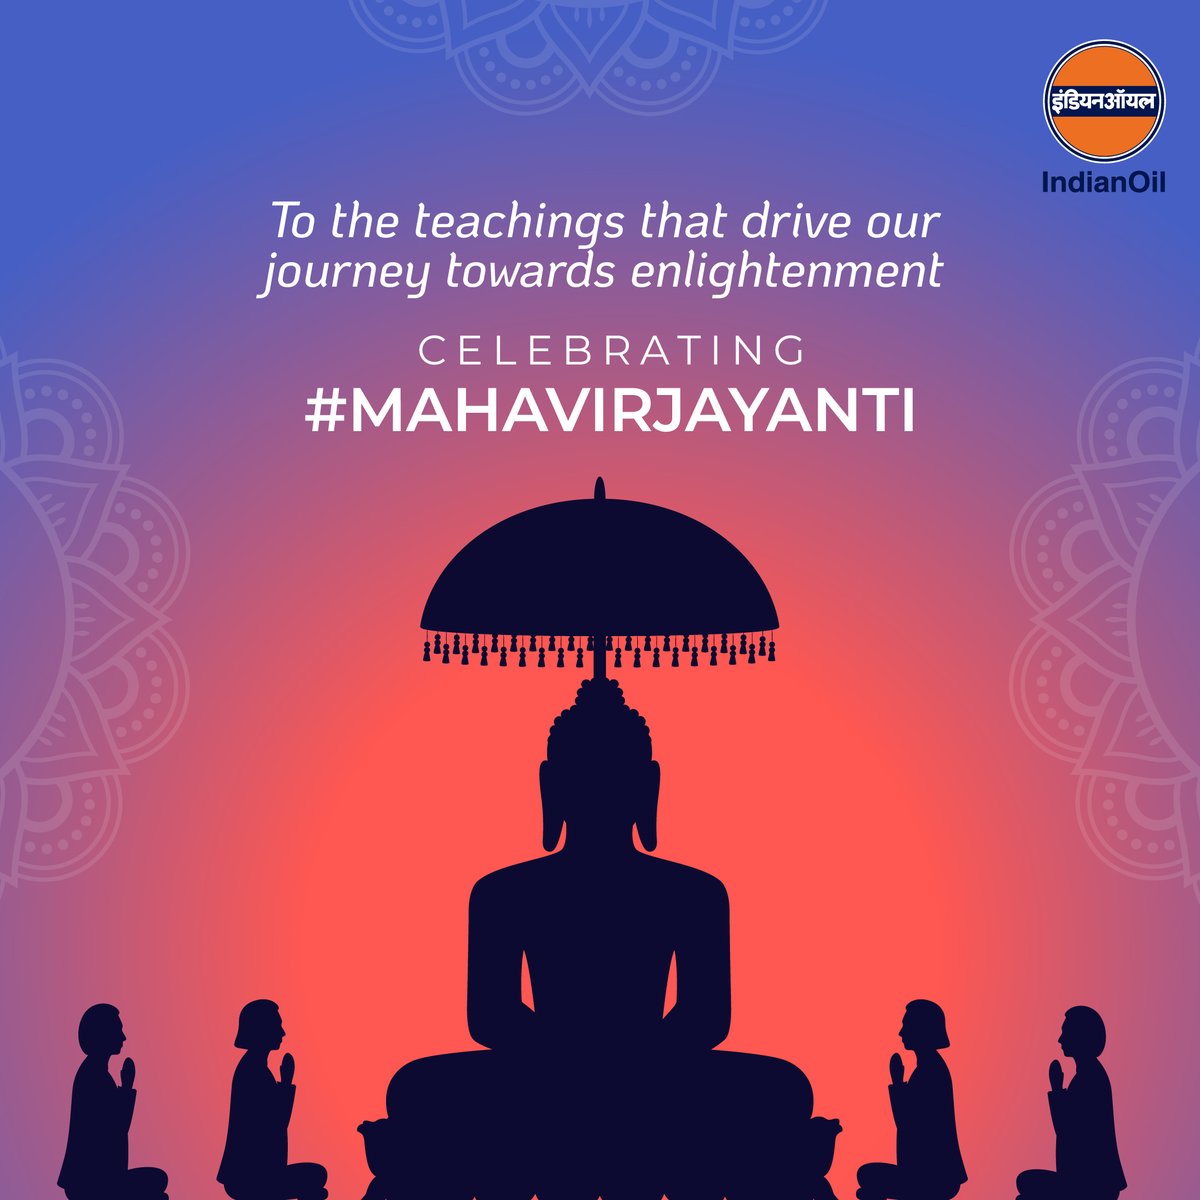 Amidst the serene aura of #MahavirJayanti, IndianOil humbly embraces the profound teachings of Lord Mahavira. Let's celebrate this day by embodying the spirit of non-violence, truth, and compassion, guiding our journey towards enlightenment. #IndianOil